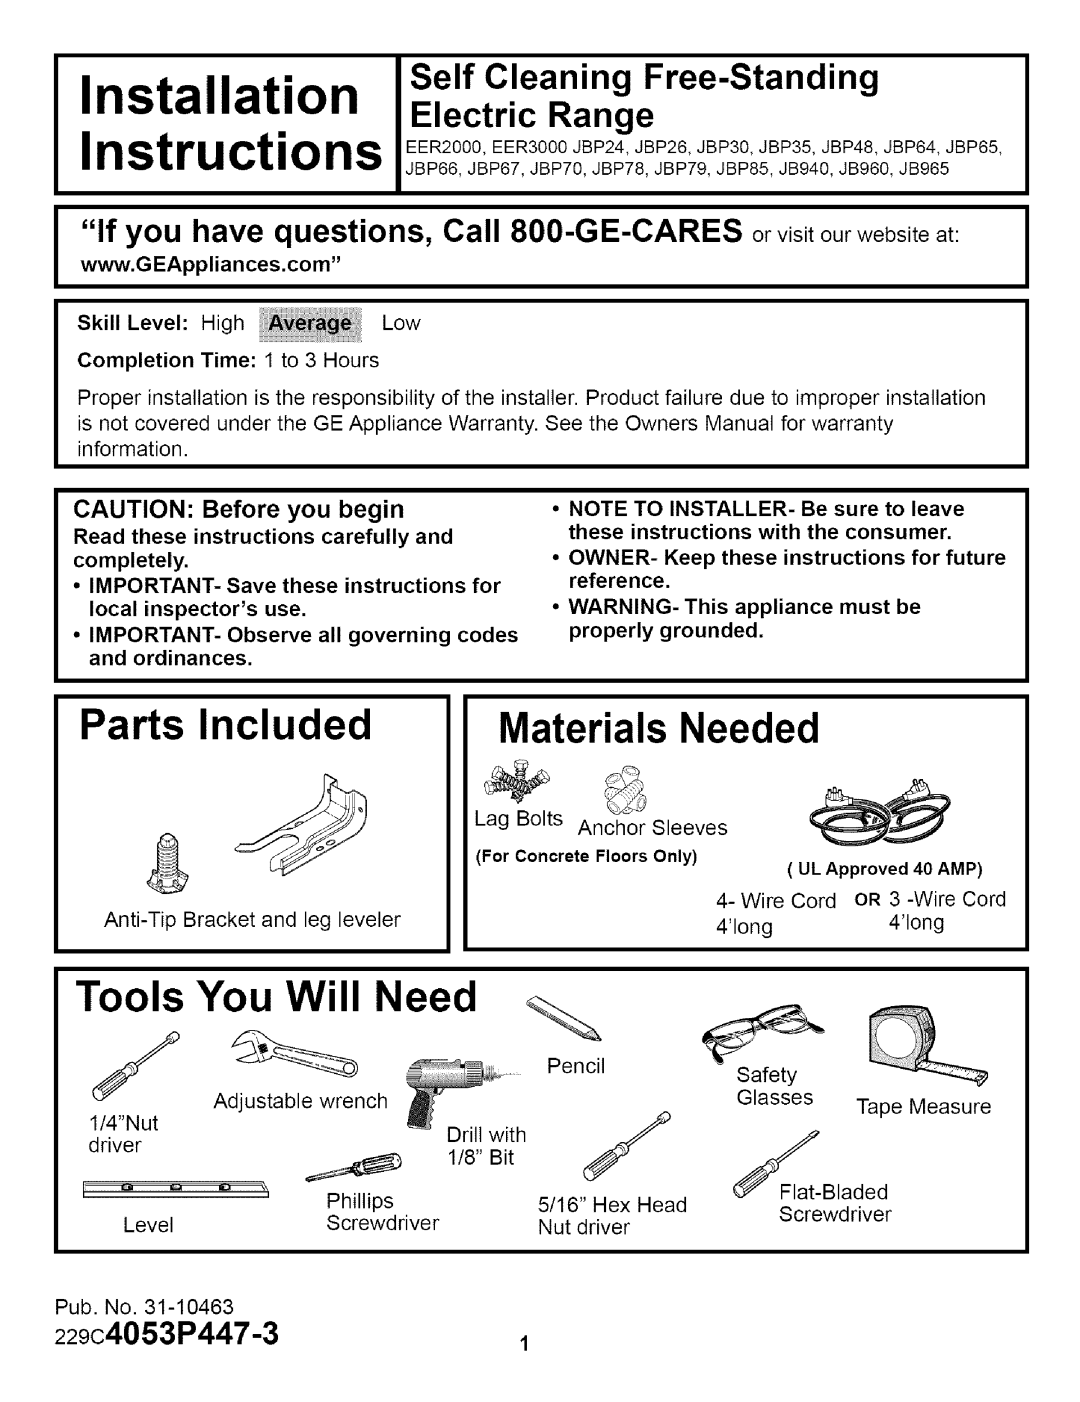 GE JBP79 owner manual Owner’s Manual, GE Appliances, RangesSelf-Cleaning Electric, Safety Information, Care and Cleaning 